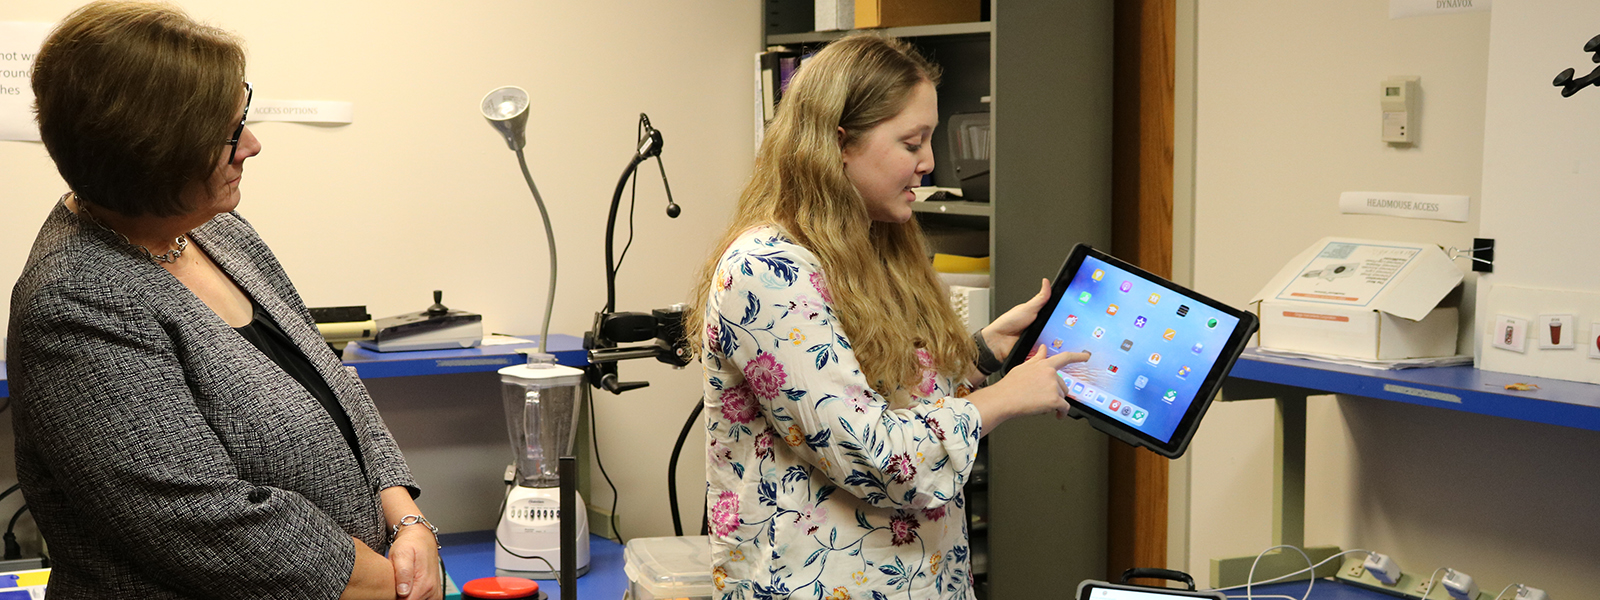 Kelly Woodworth, a speech-language pathology graduate student, demonstrates how an iPad might be used as an AAC device.